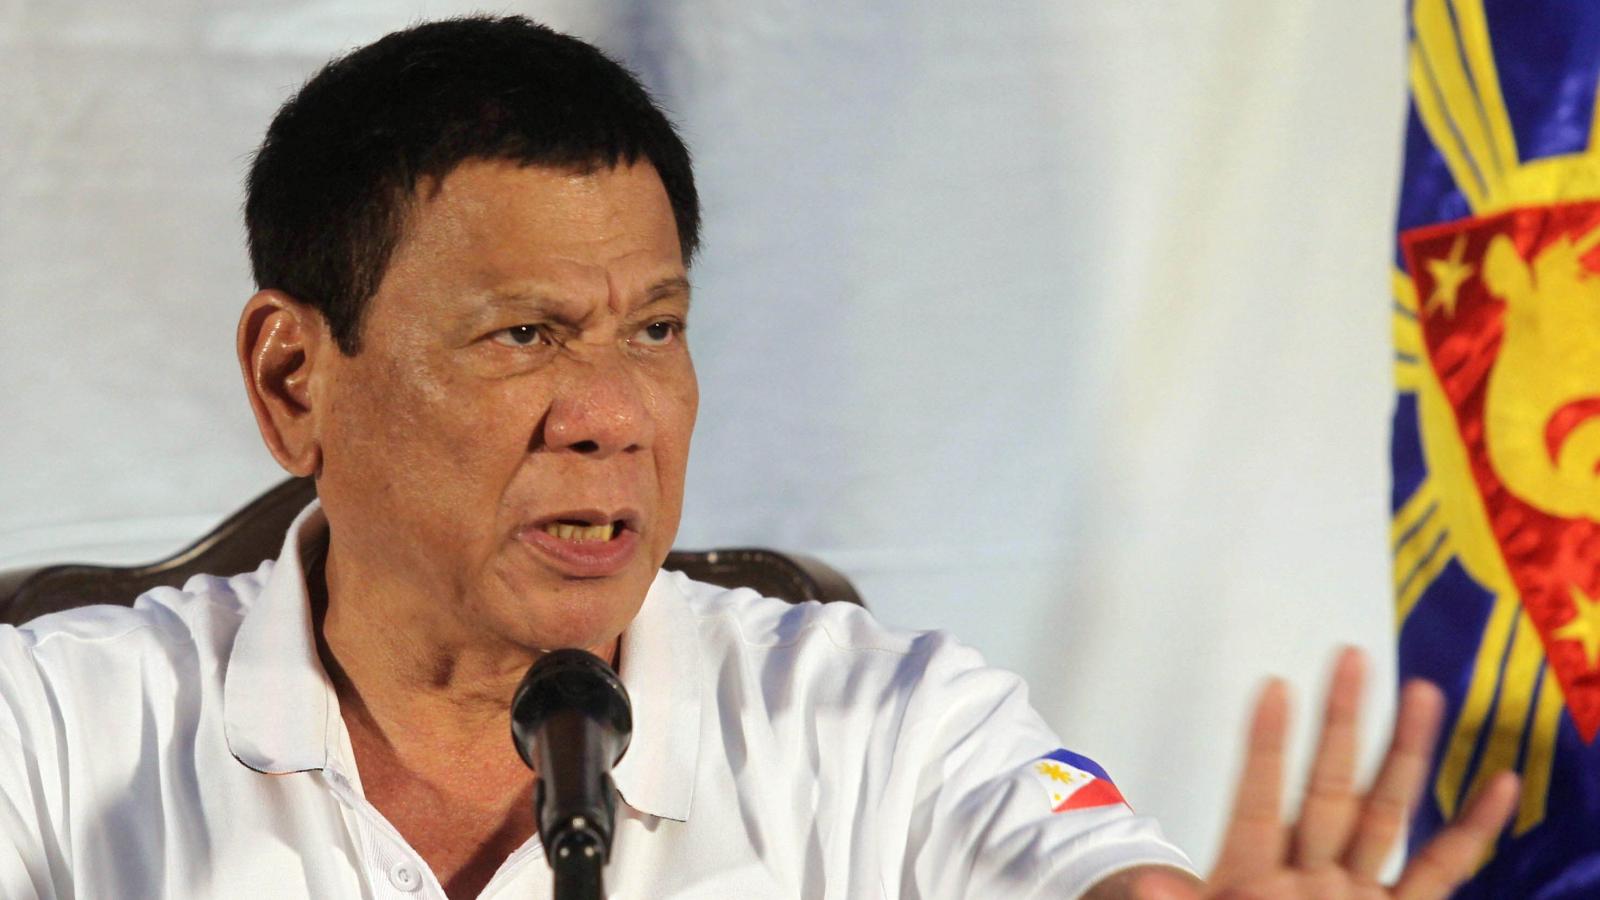 You Are A Psychopath An Actress S Post On Philippines President